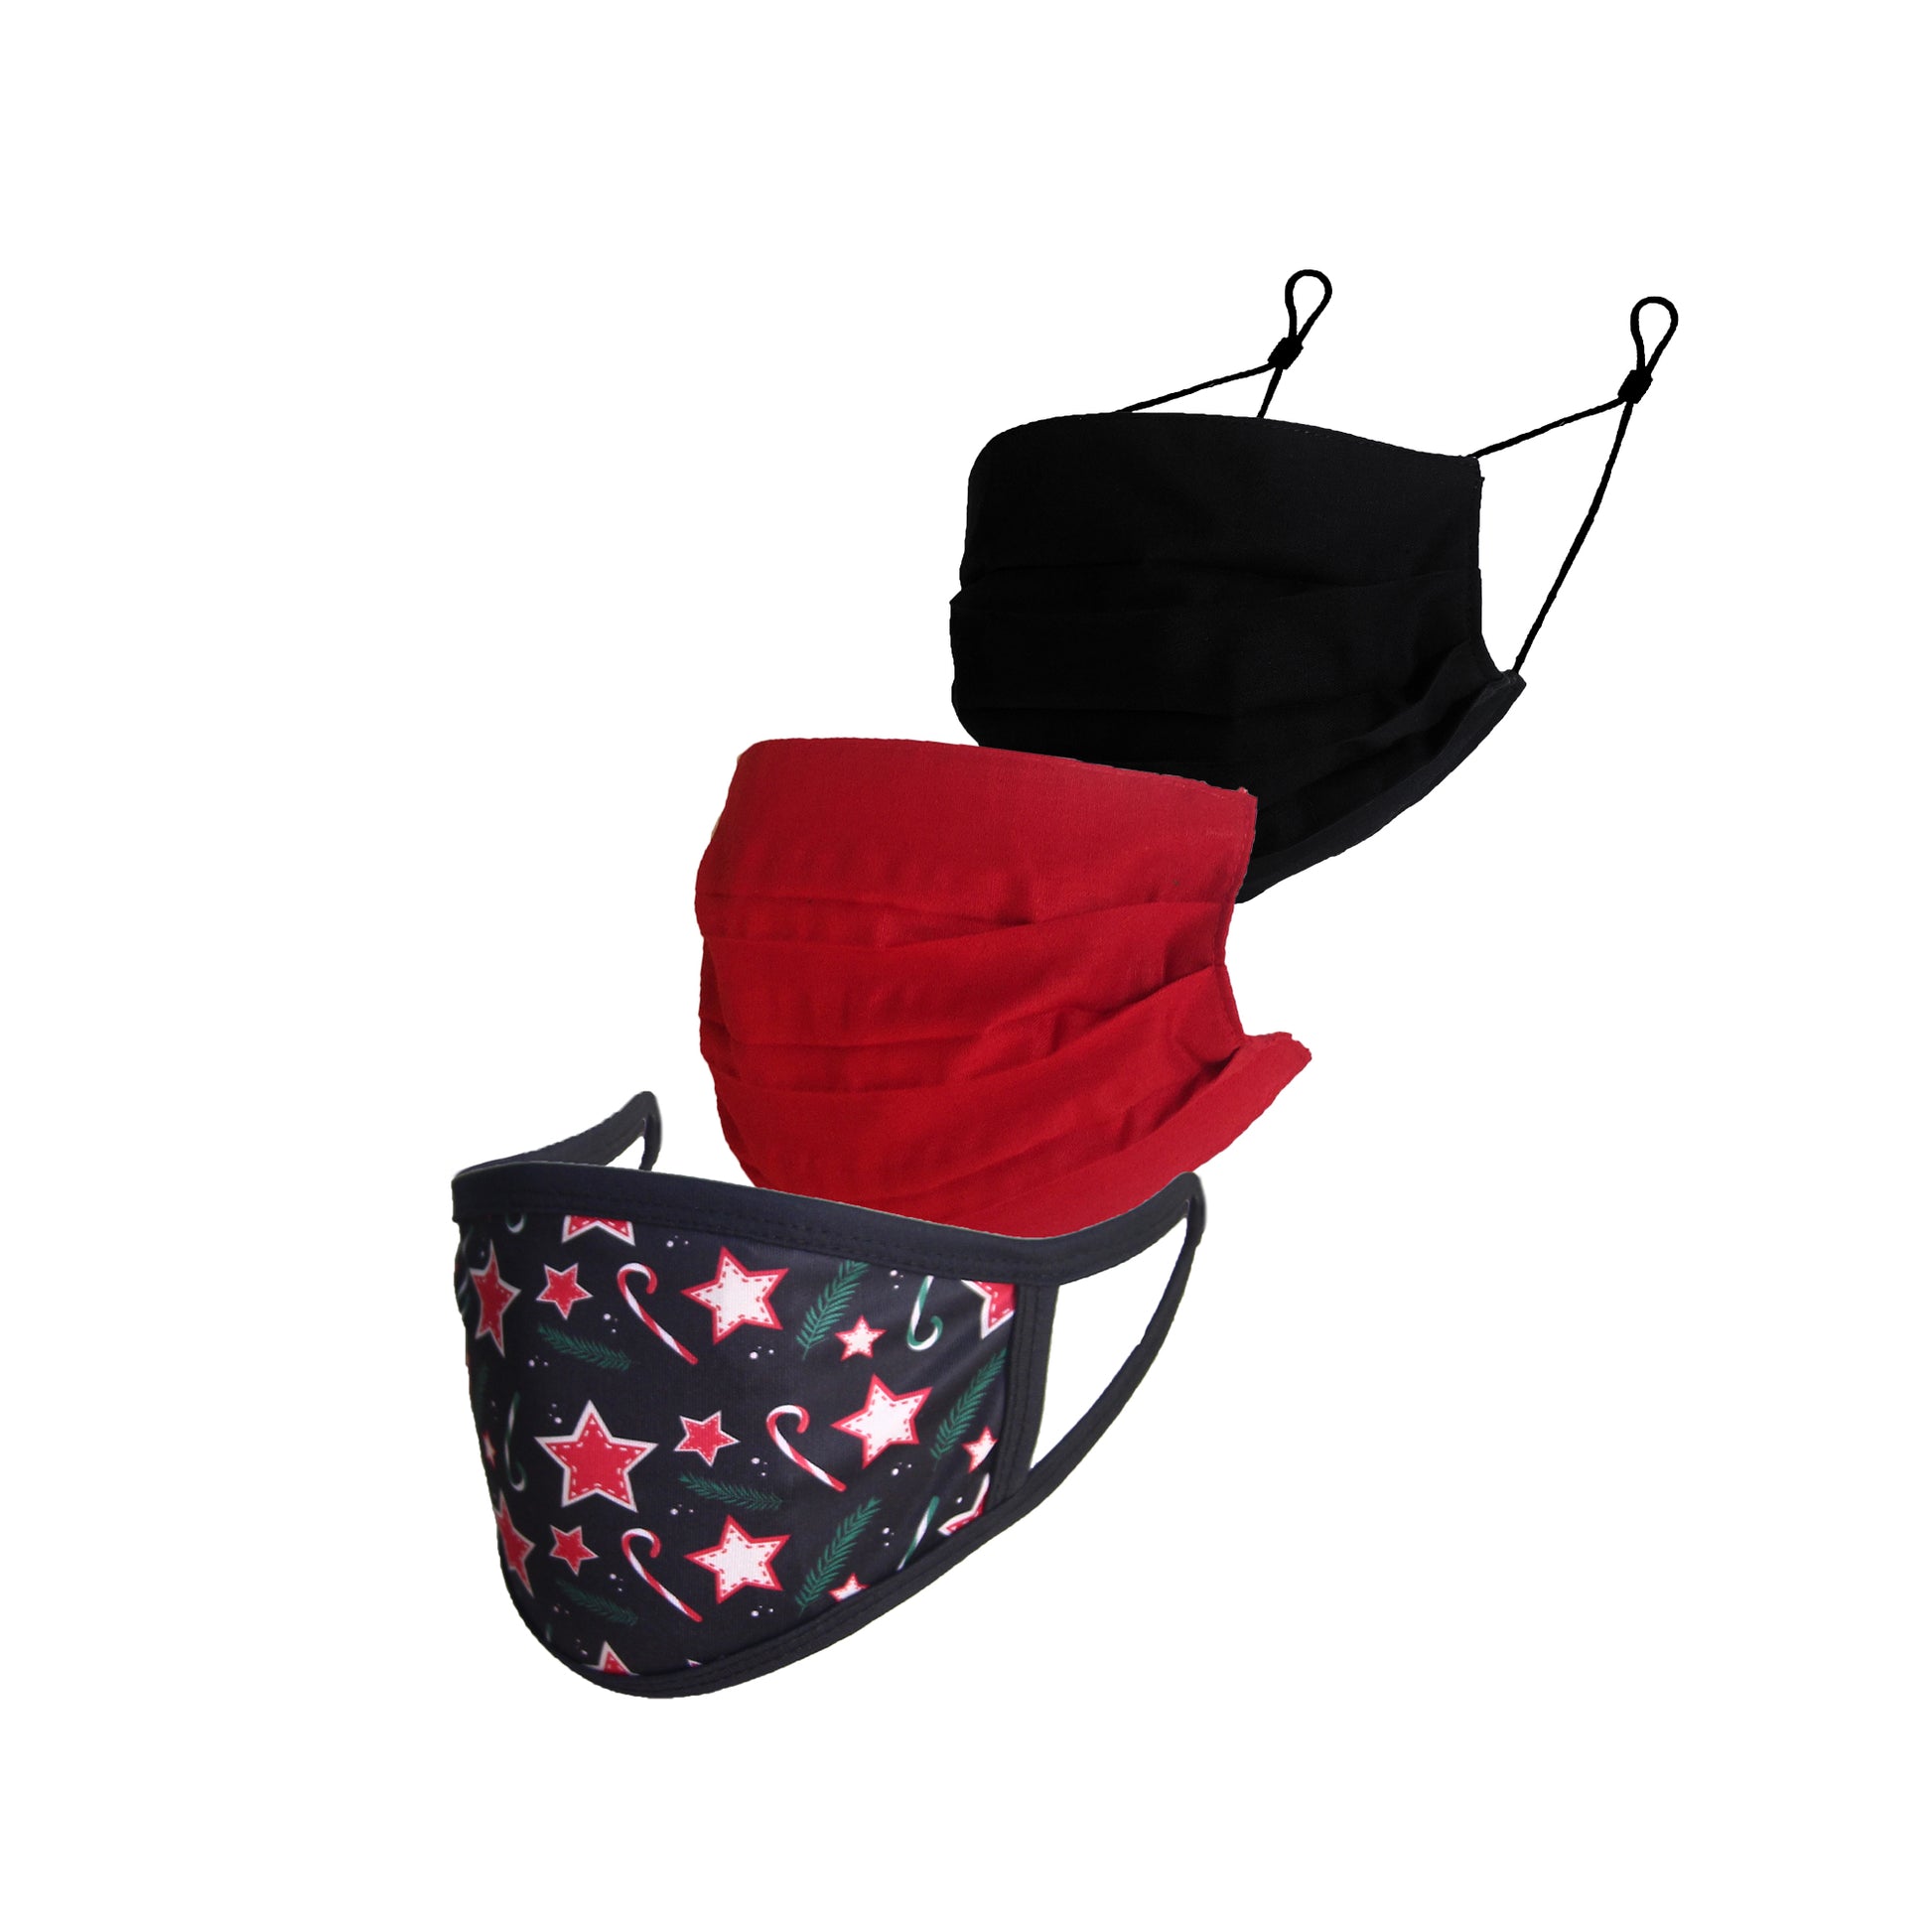 Pack of 3 Fashion Mask- Black Pleated, Ruby Red, Christmas Star